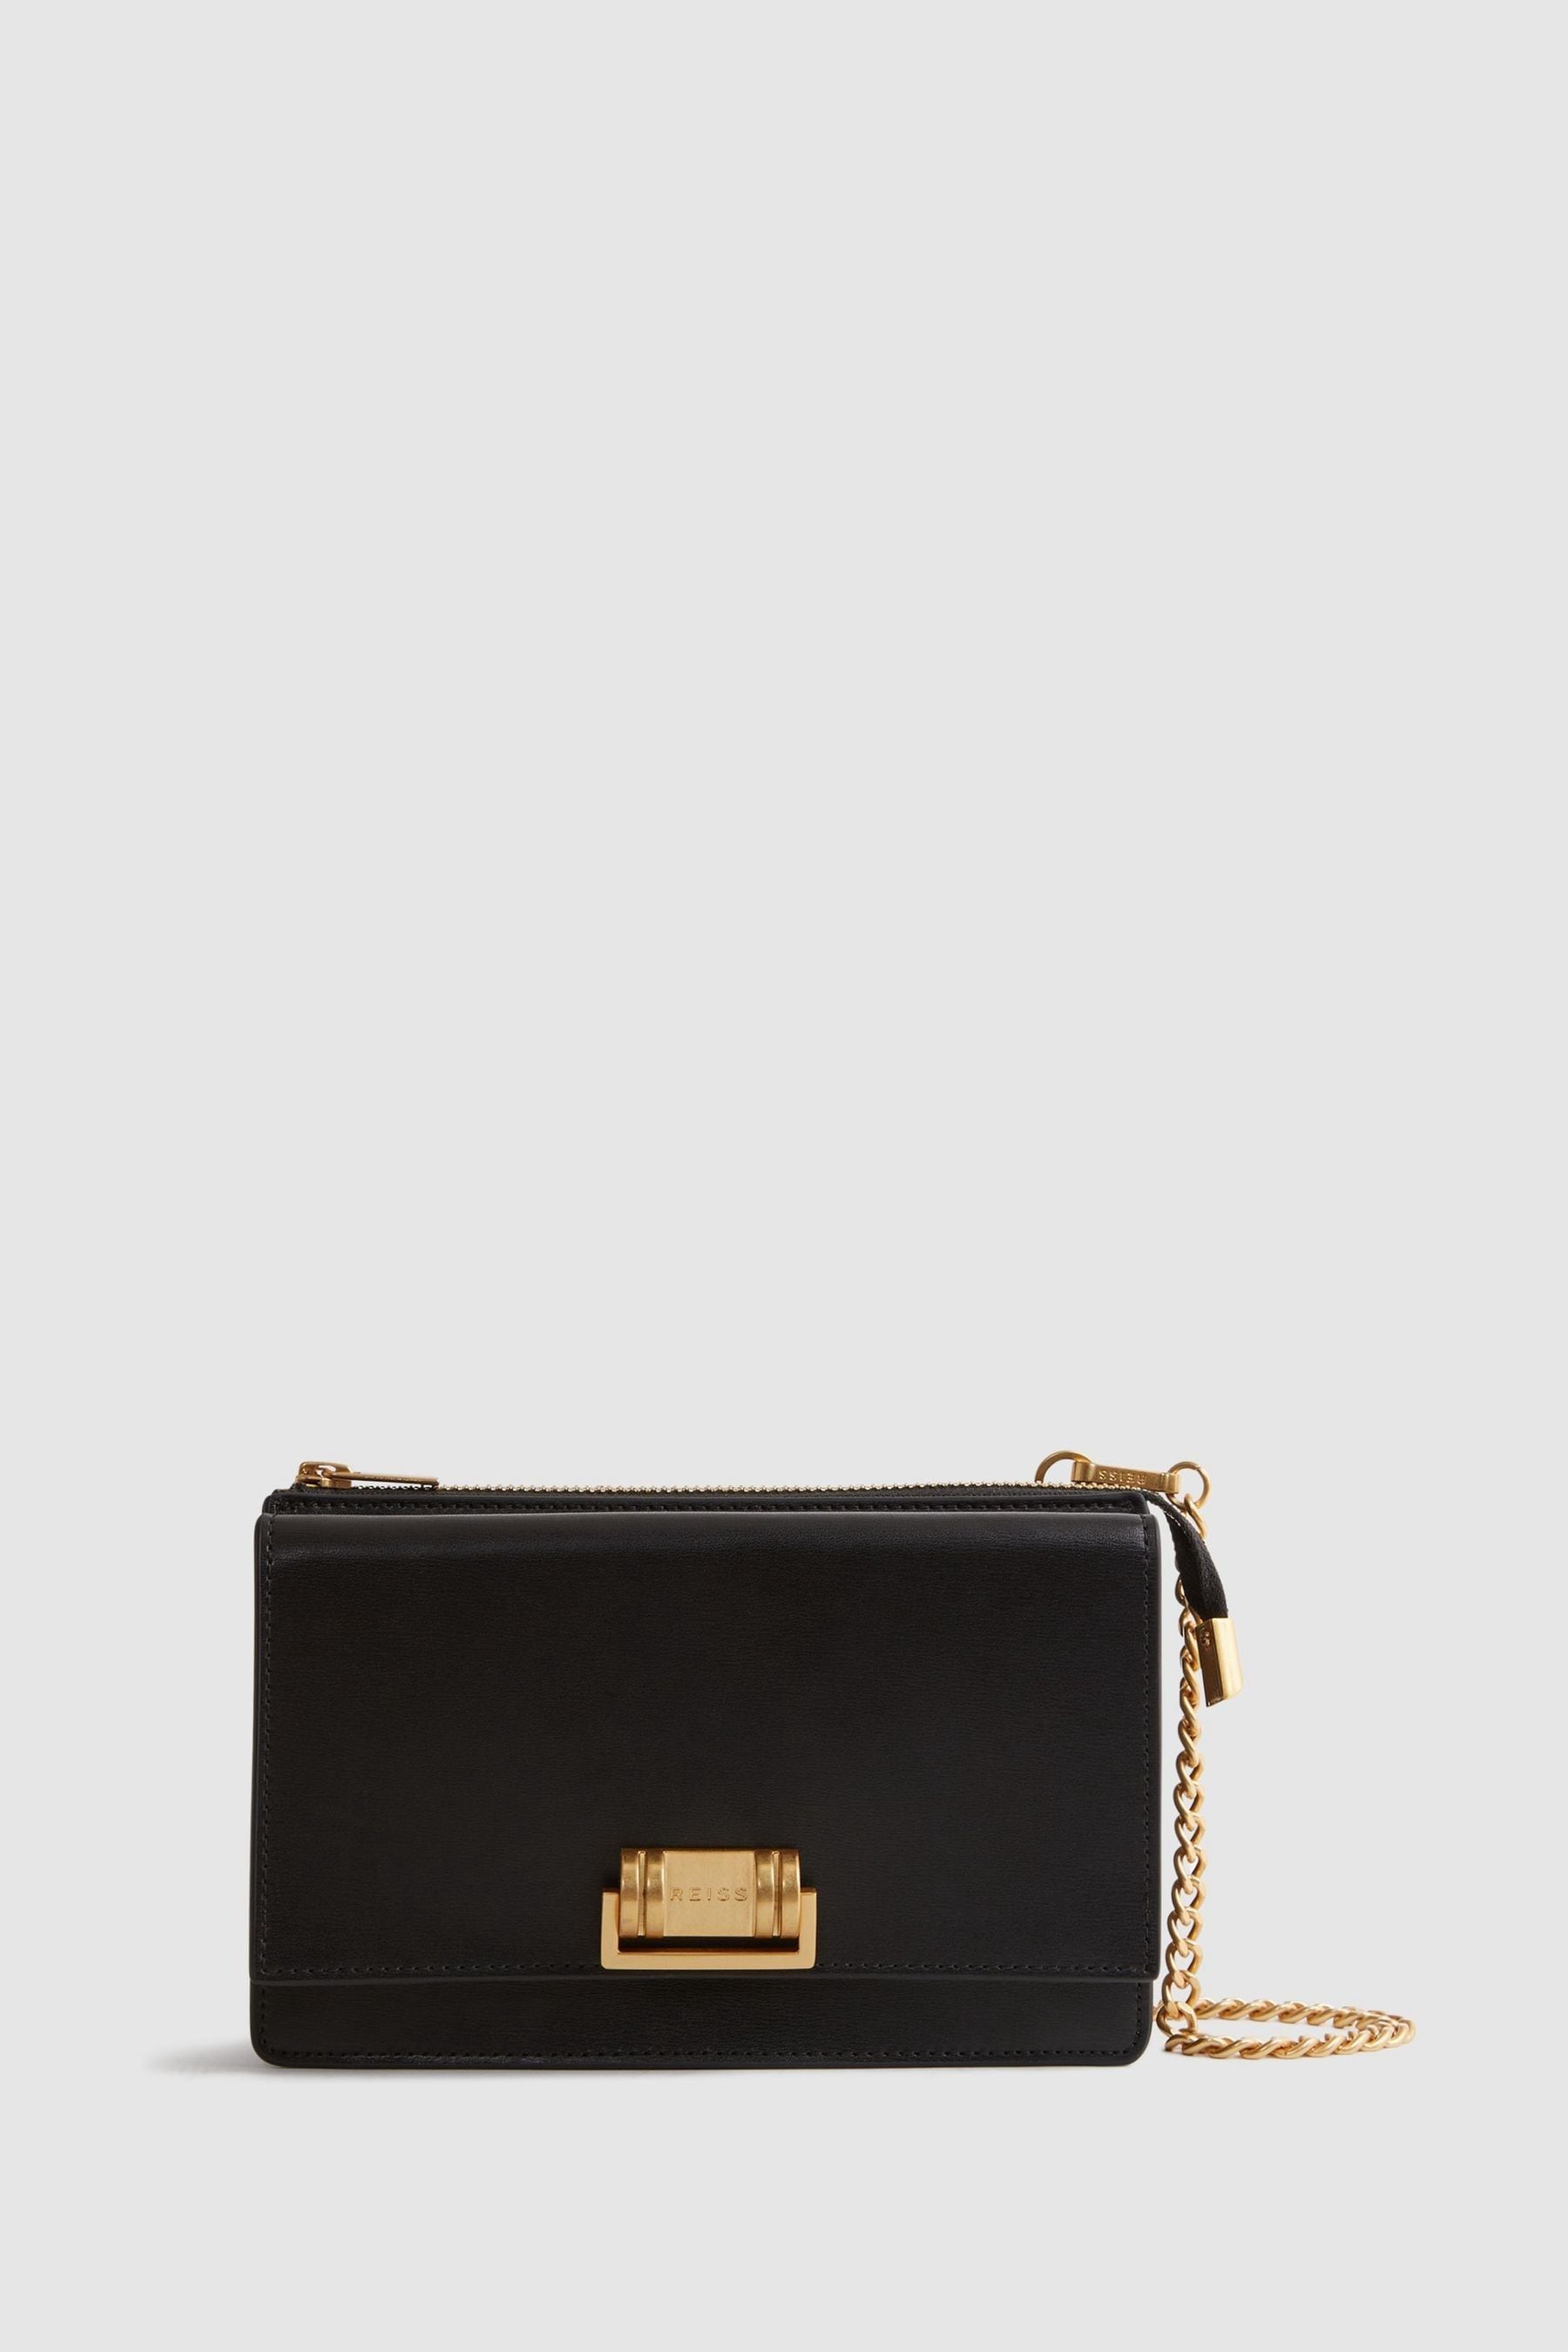 Reiss Picton - Black Leather Chain Crossbody Bag, One